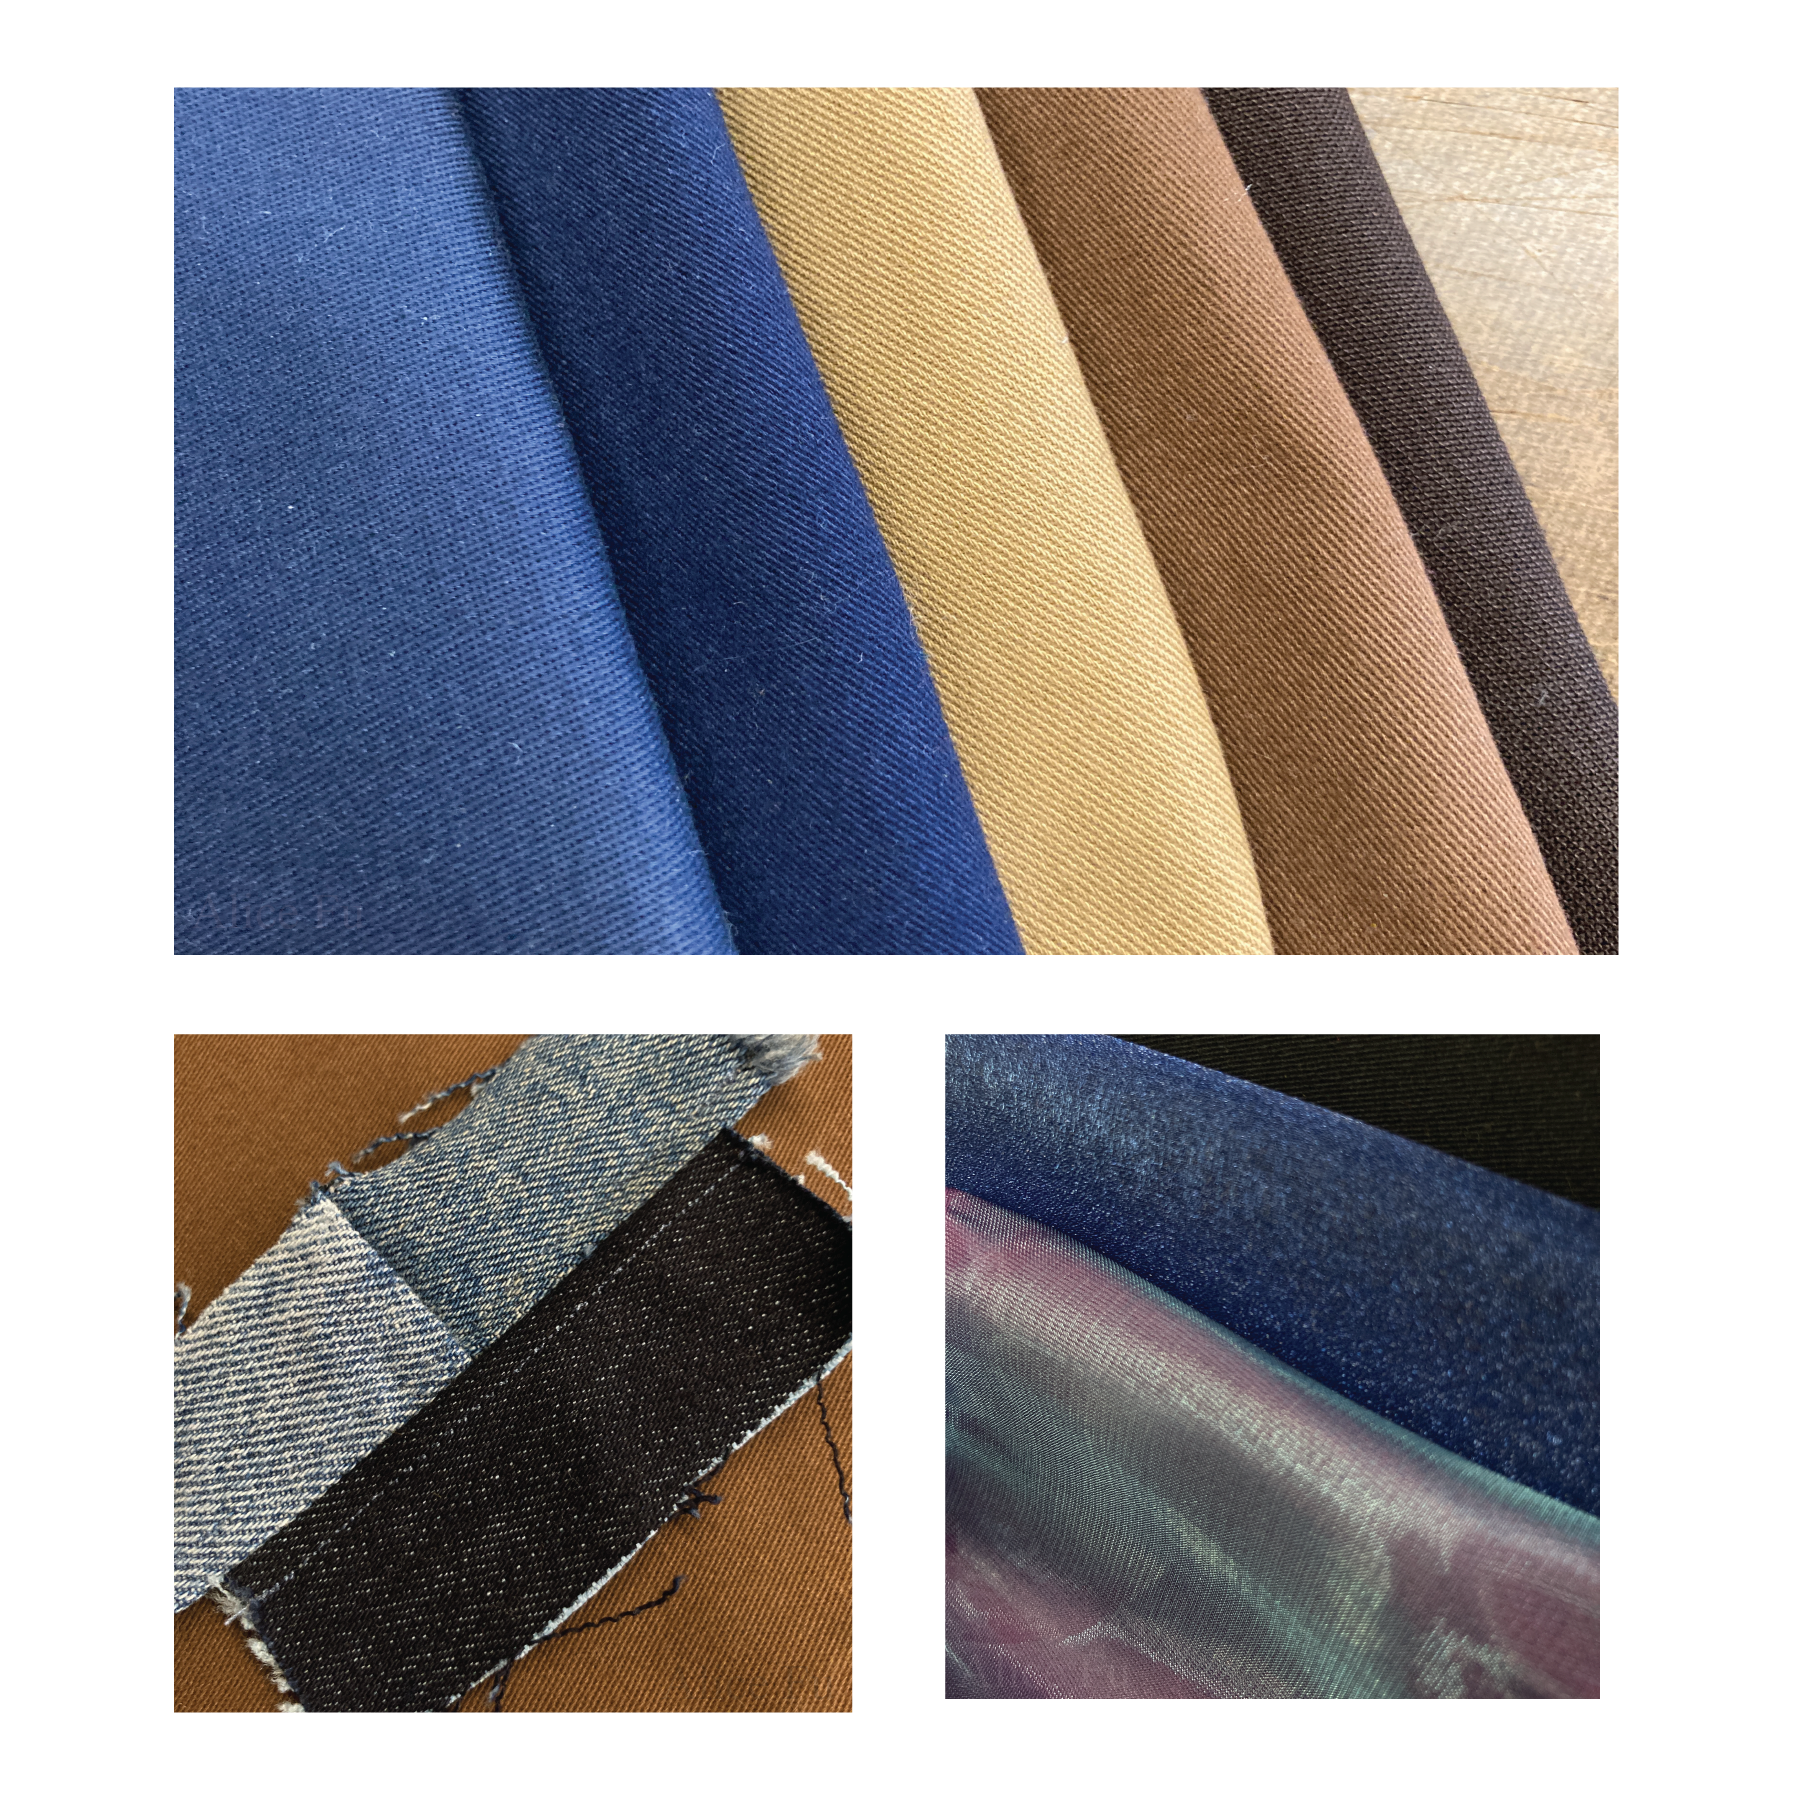 Capsule 起 Collection F2022 Fabrics Image 1: Main garment fabric: cotton Twill and cotton twill with 3% spandex Image 2: Upcycled denim patchwork sample Image 3: Appliqué fabric: organza and silk organza